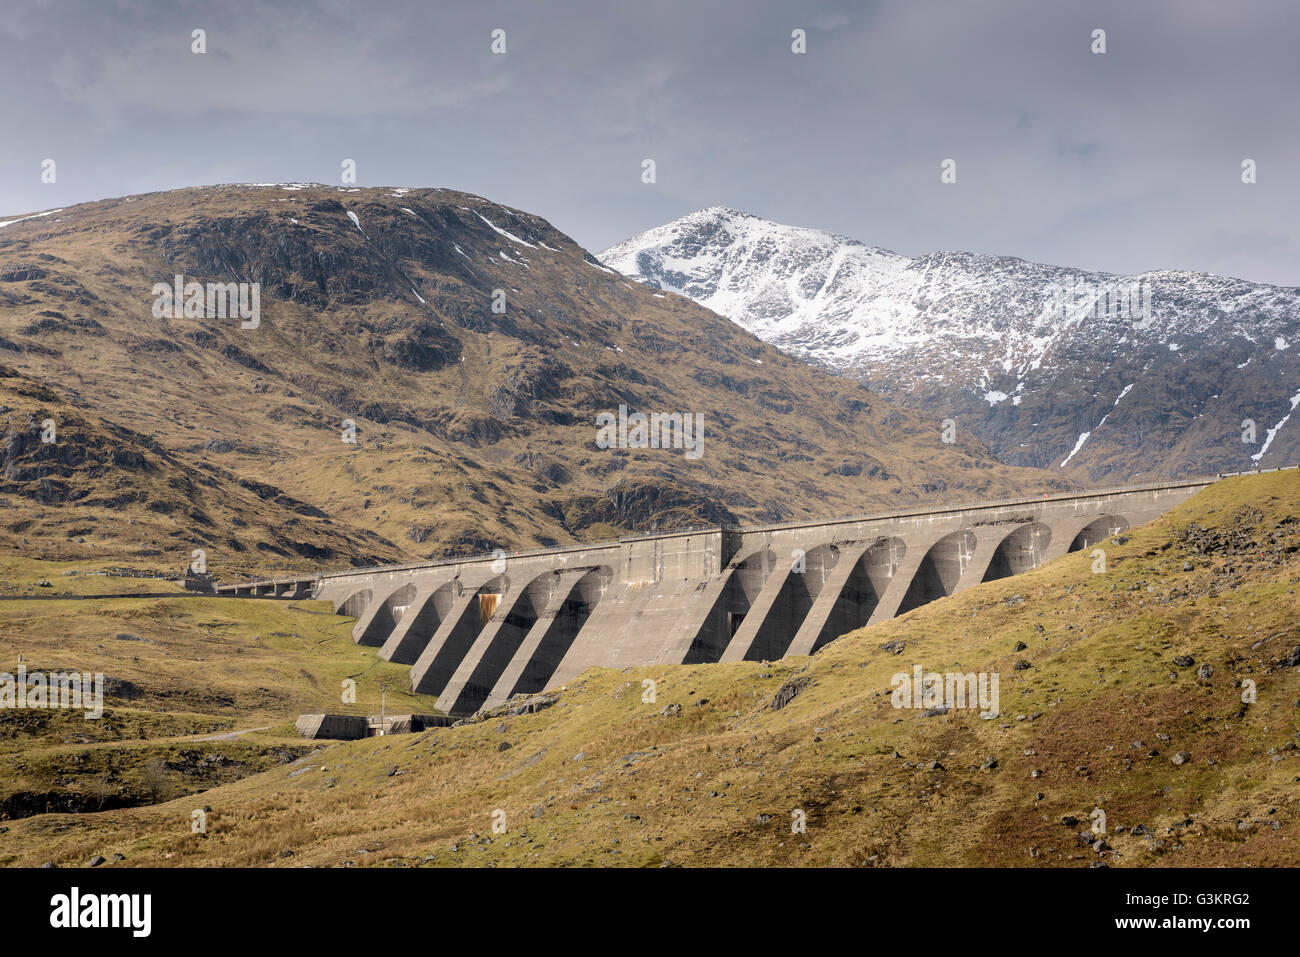 View of Cruachan hydroelectric power station dam in Scotland Stock Photo